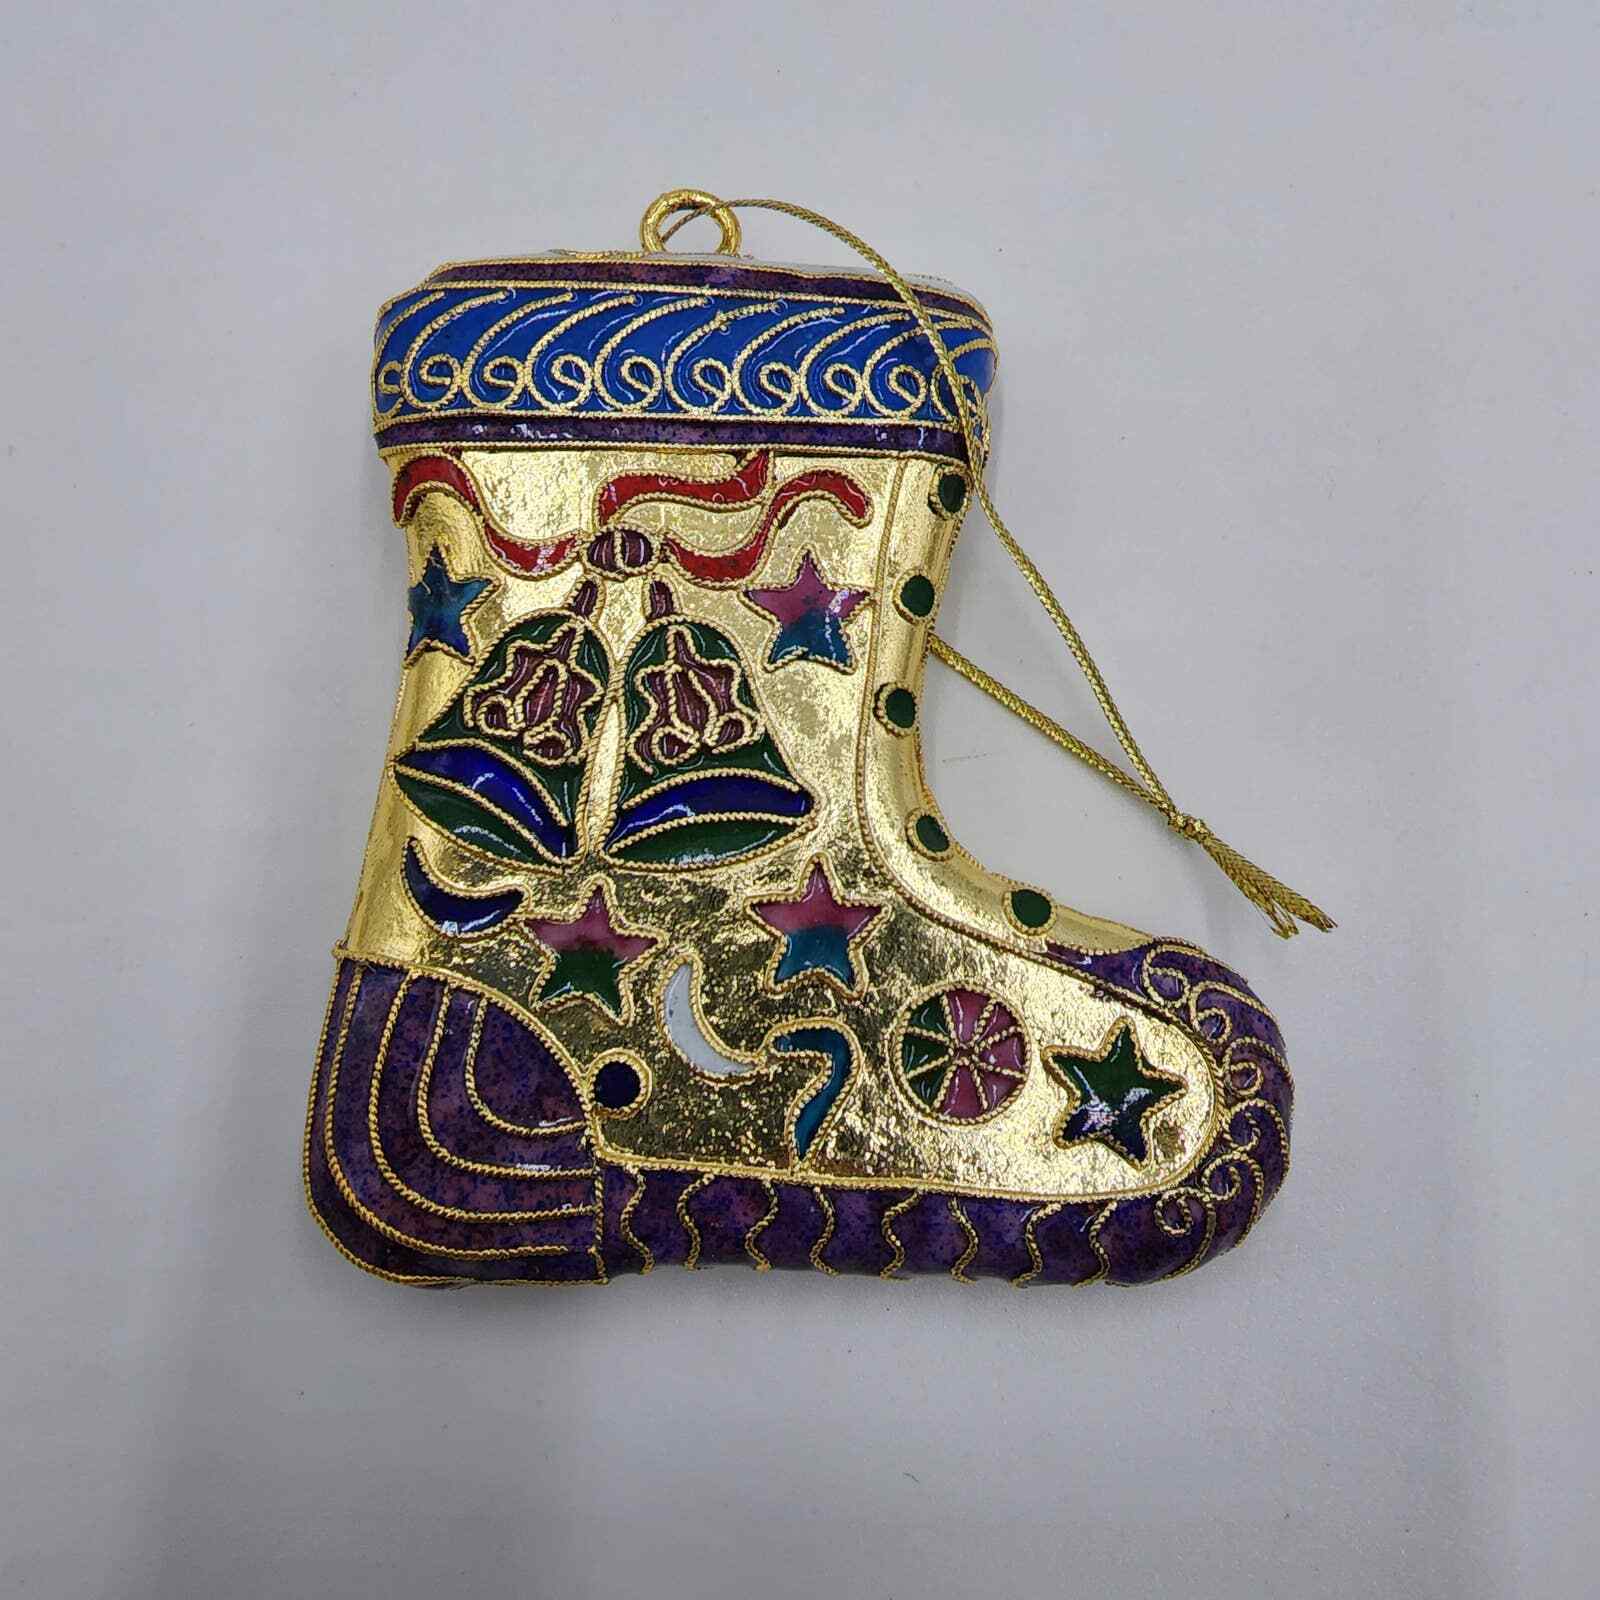 Vintage Christmas Stocking Shaped Ornament With Bells Design